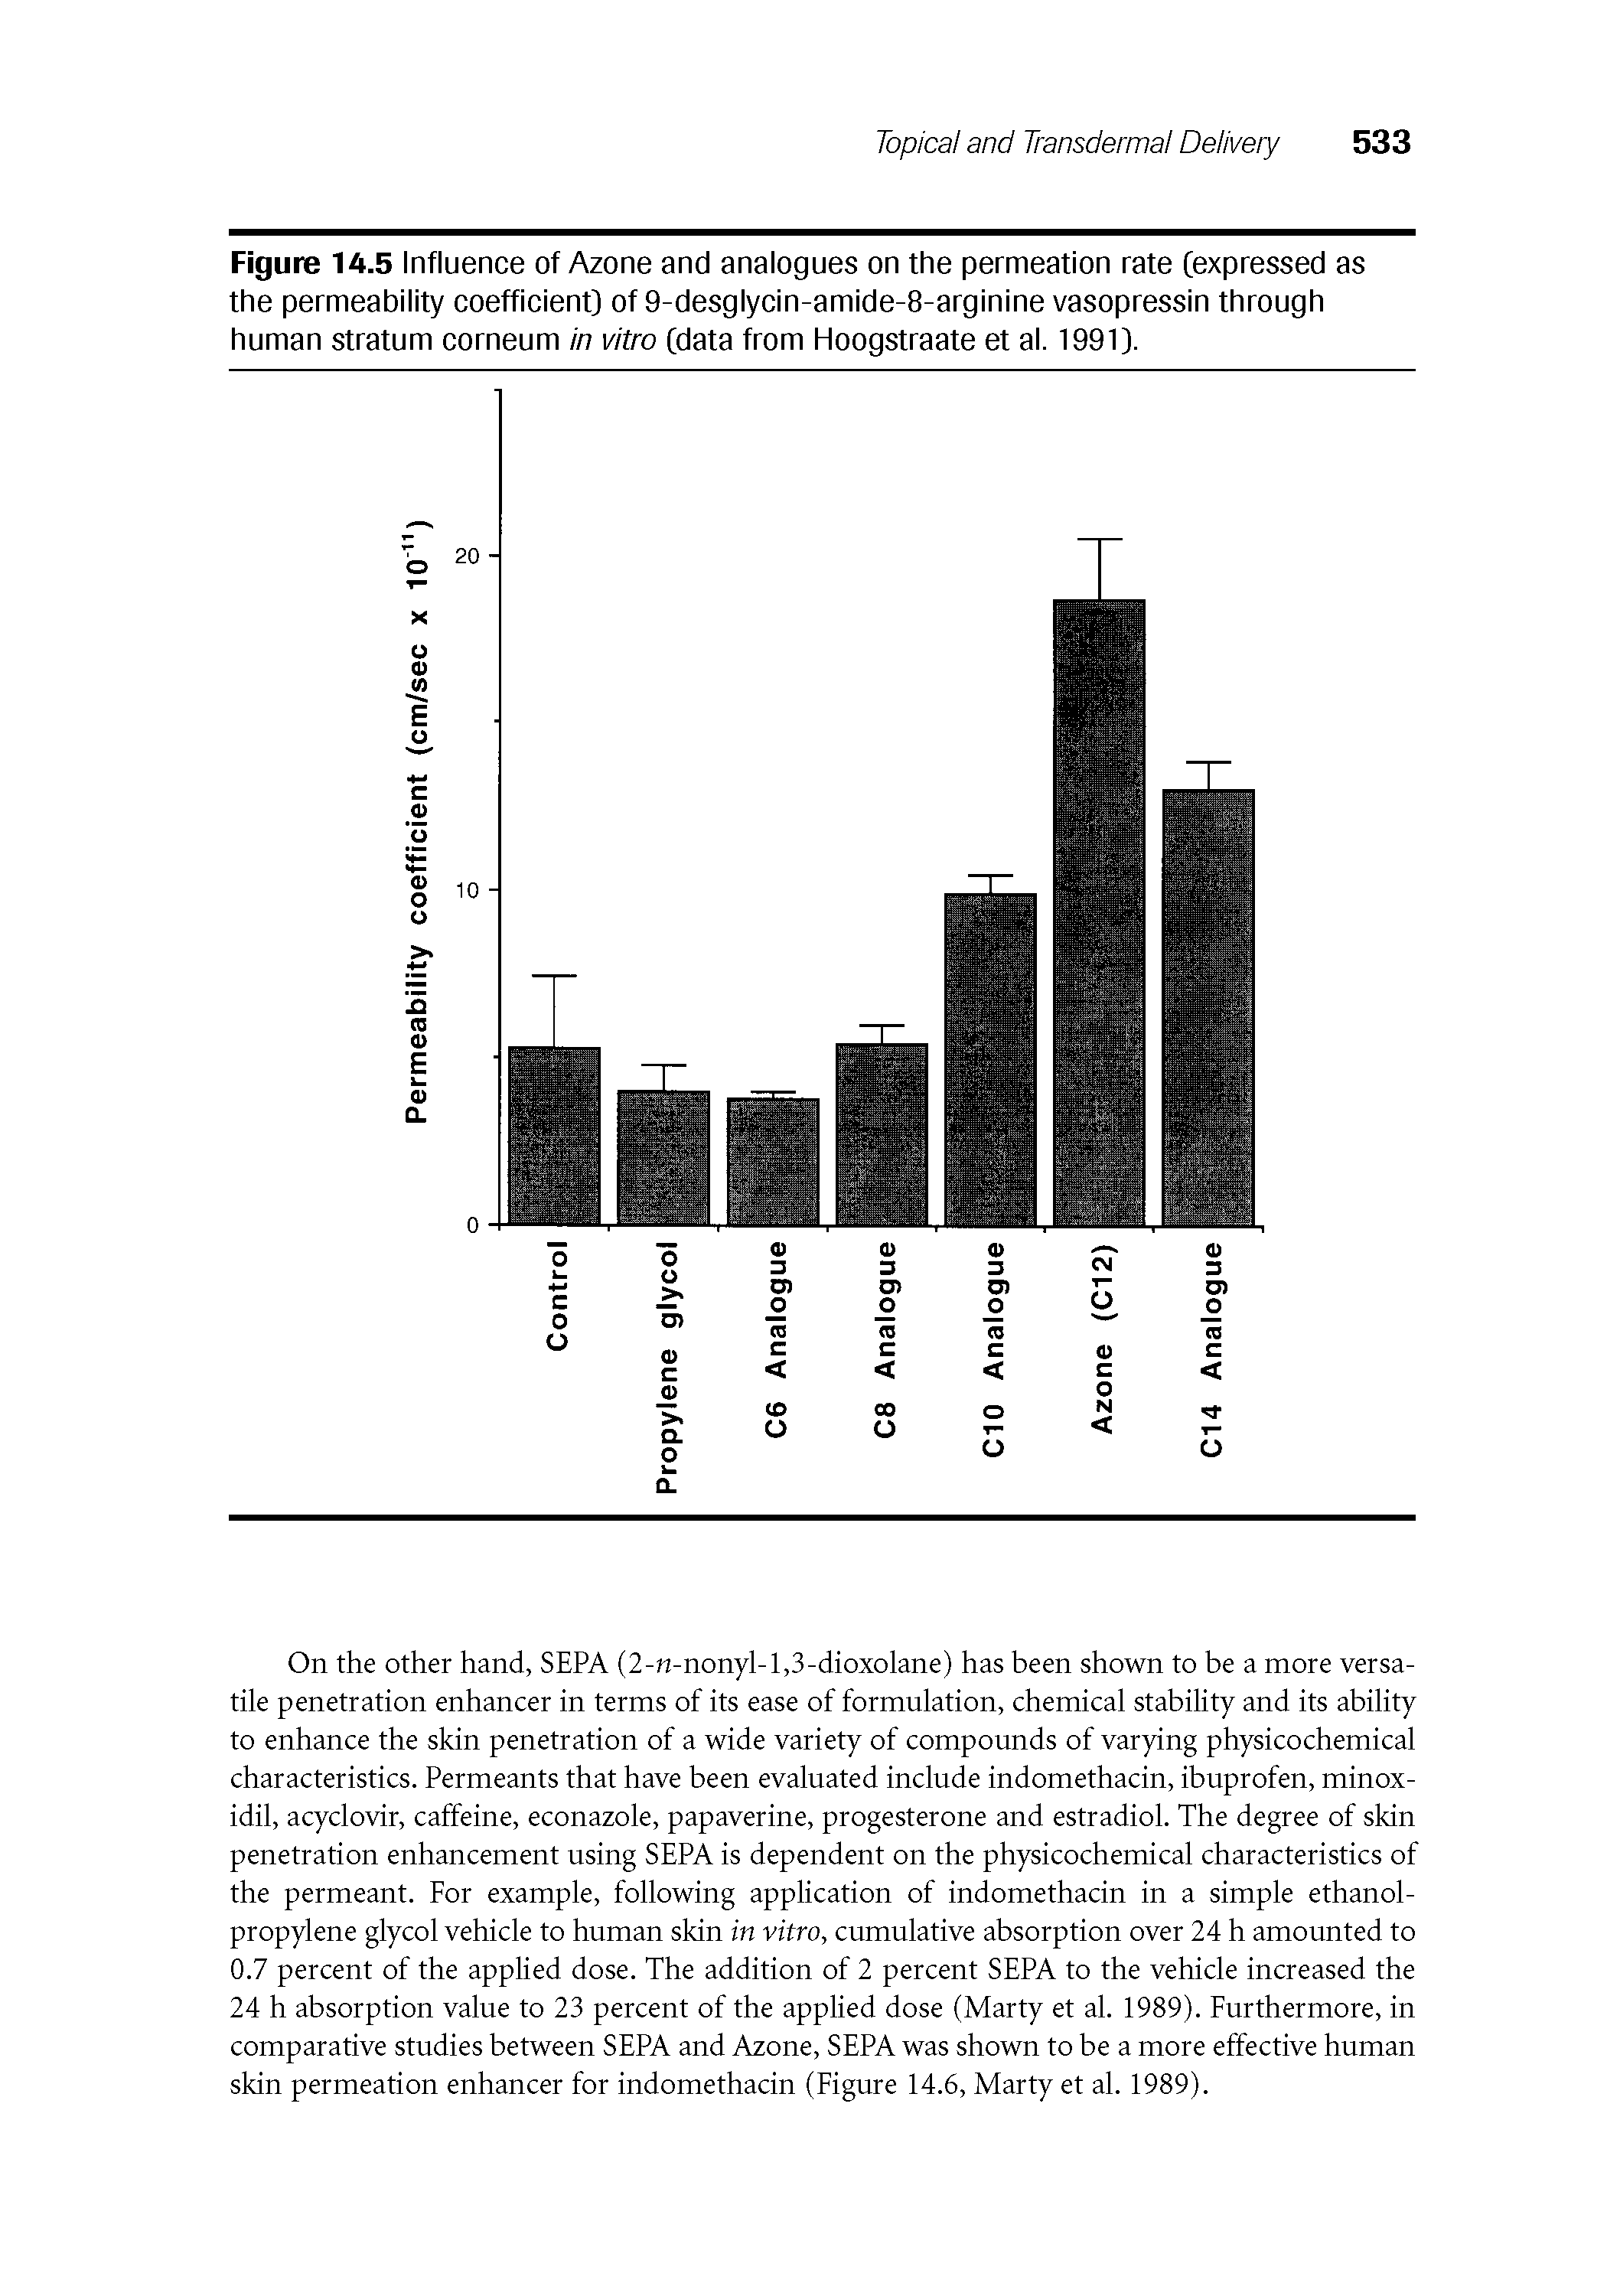 Figure 14.5 Influence of Azone and analogues on the permeation rate [expressed as the permeability coefficient) of 9-desglycin-amide-8-arginine vasopressin through human stratum corneum in vitro [data from Hoogstraate et al. 1991).